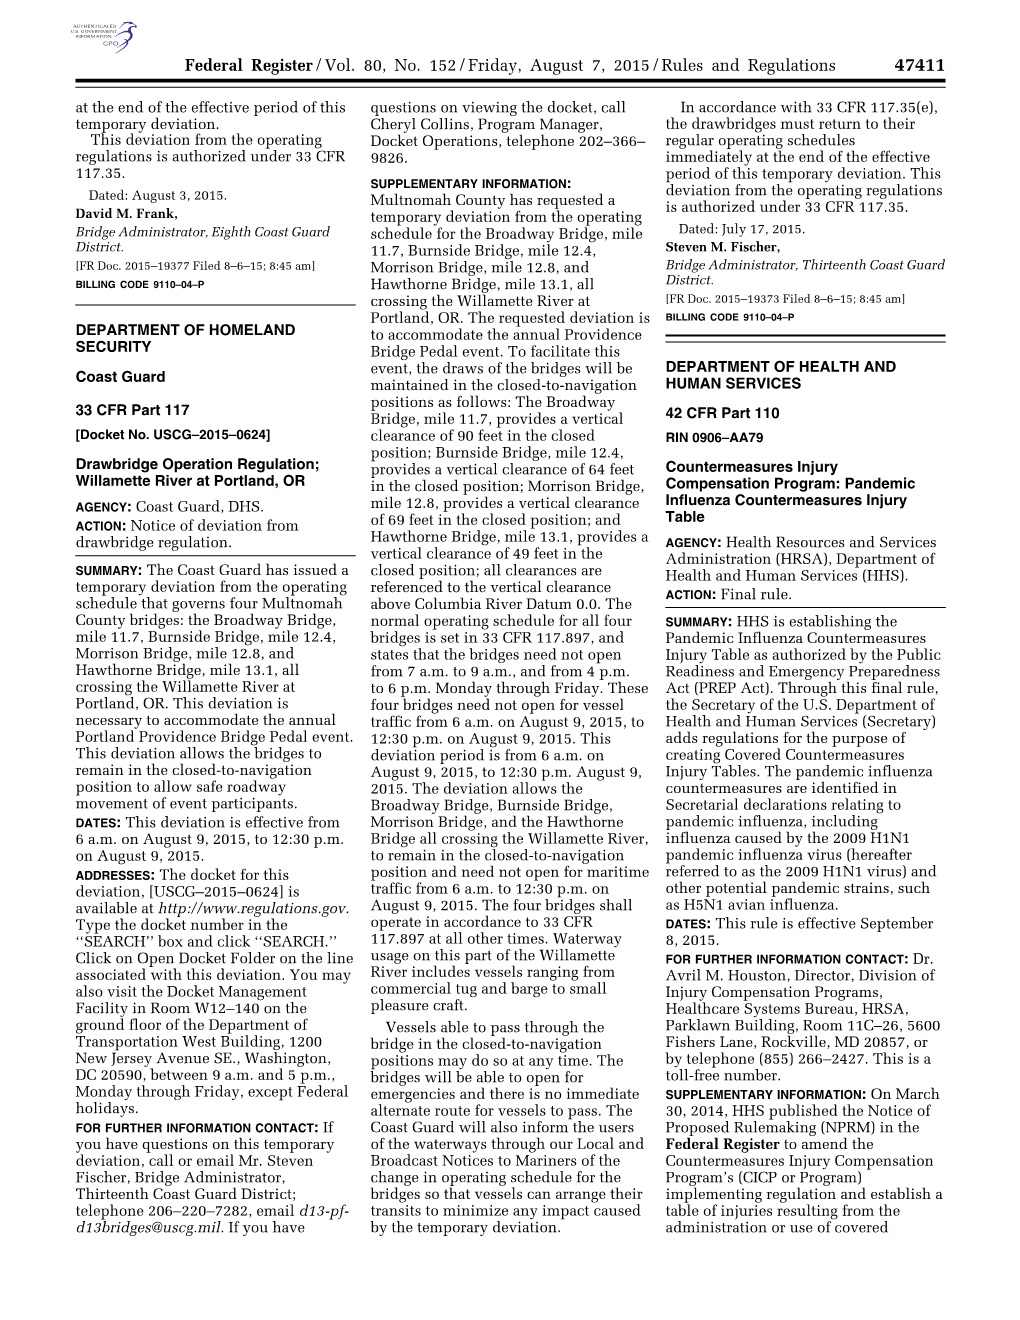 Federal Register/Vol. 80, No. 152/Friday, August 7, 2015/Rules and Regulations